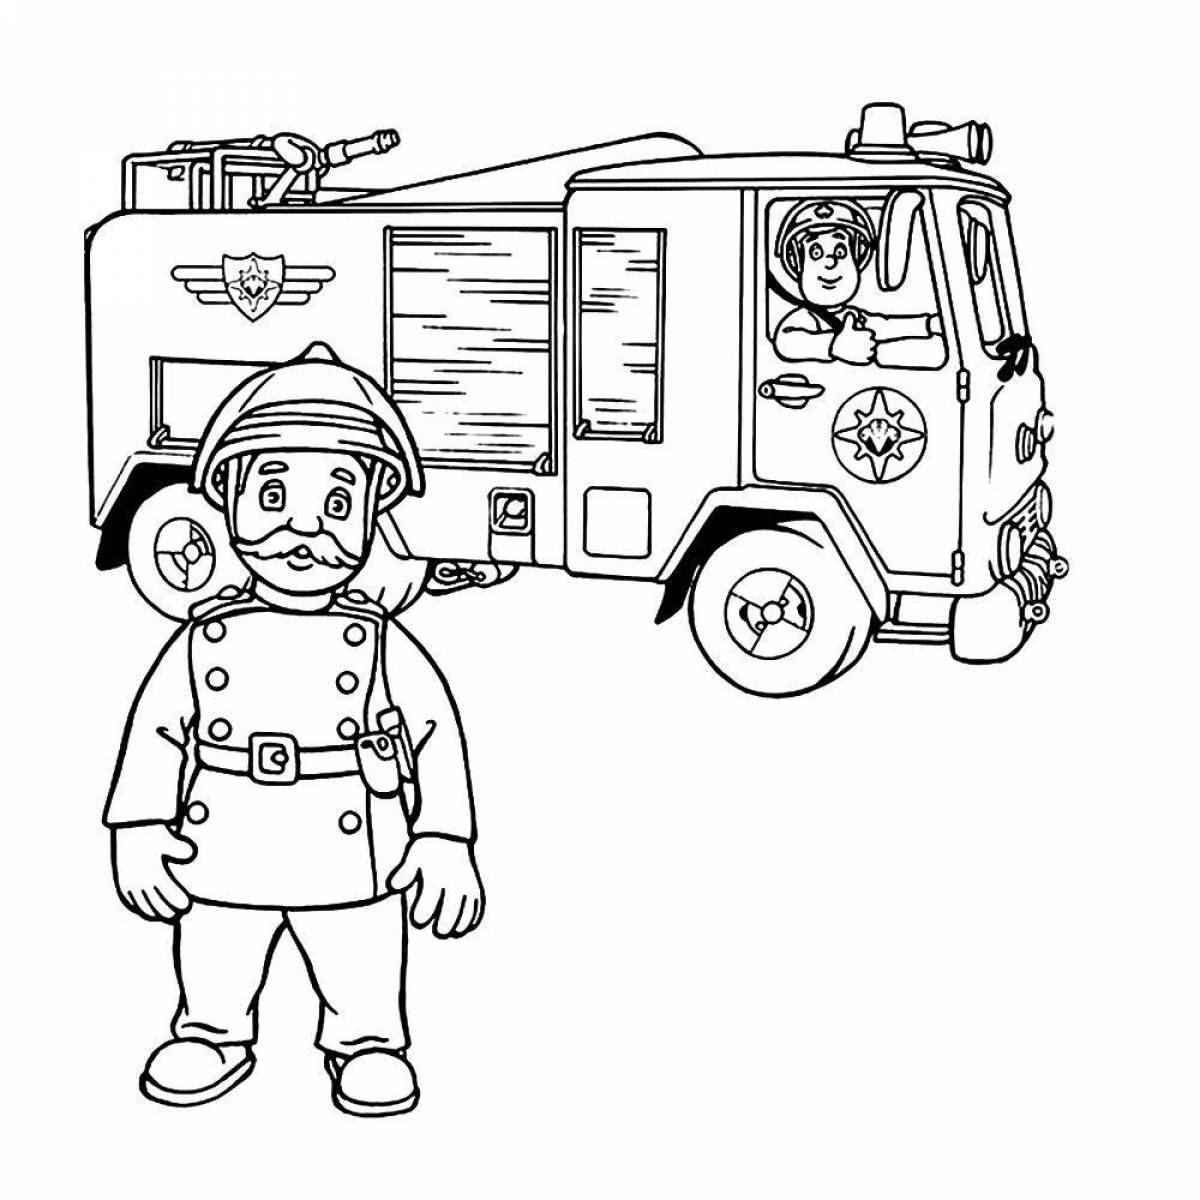 Creative firefighter coloring book for kids